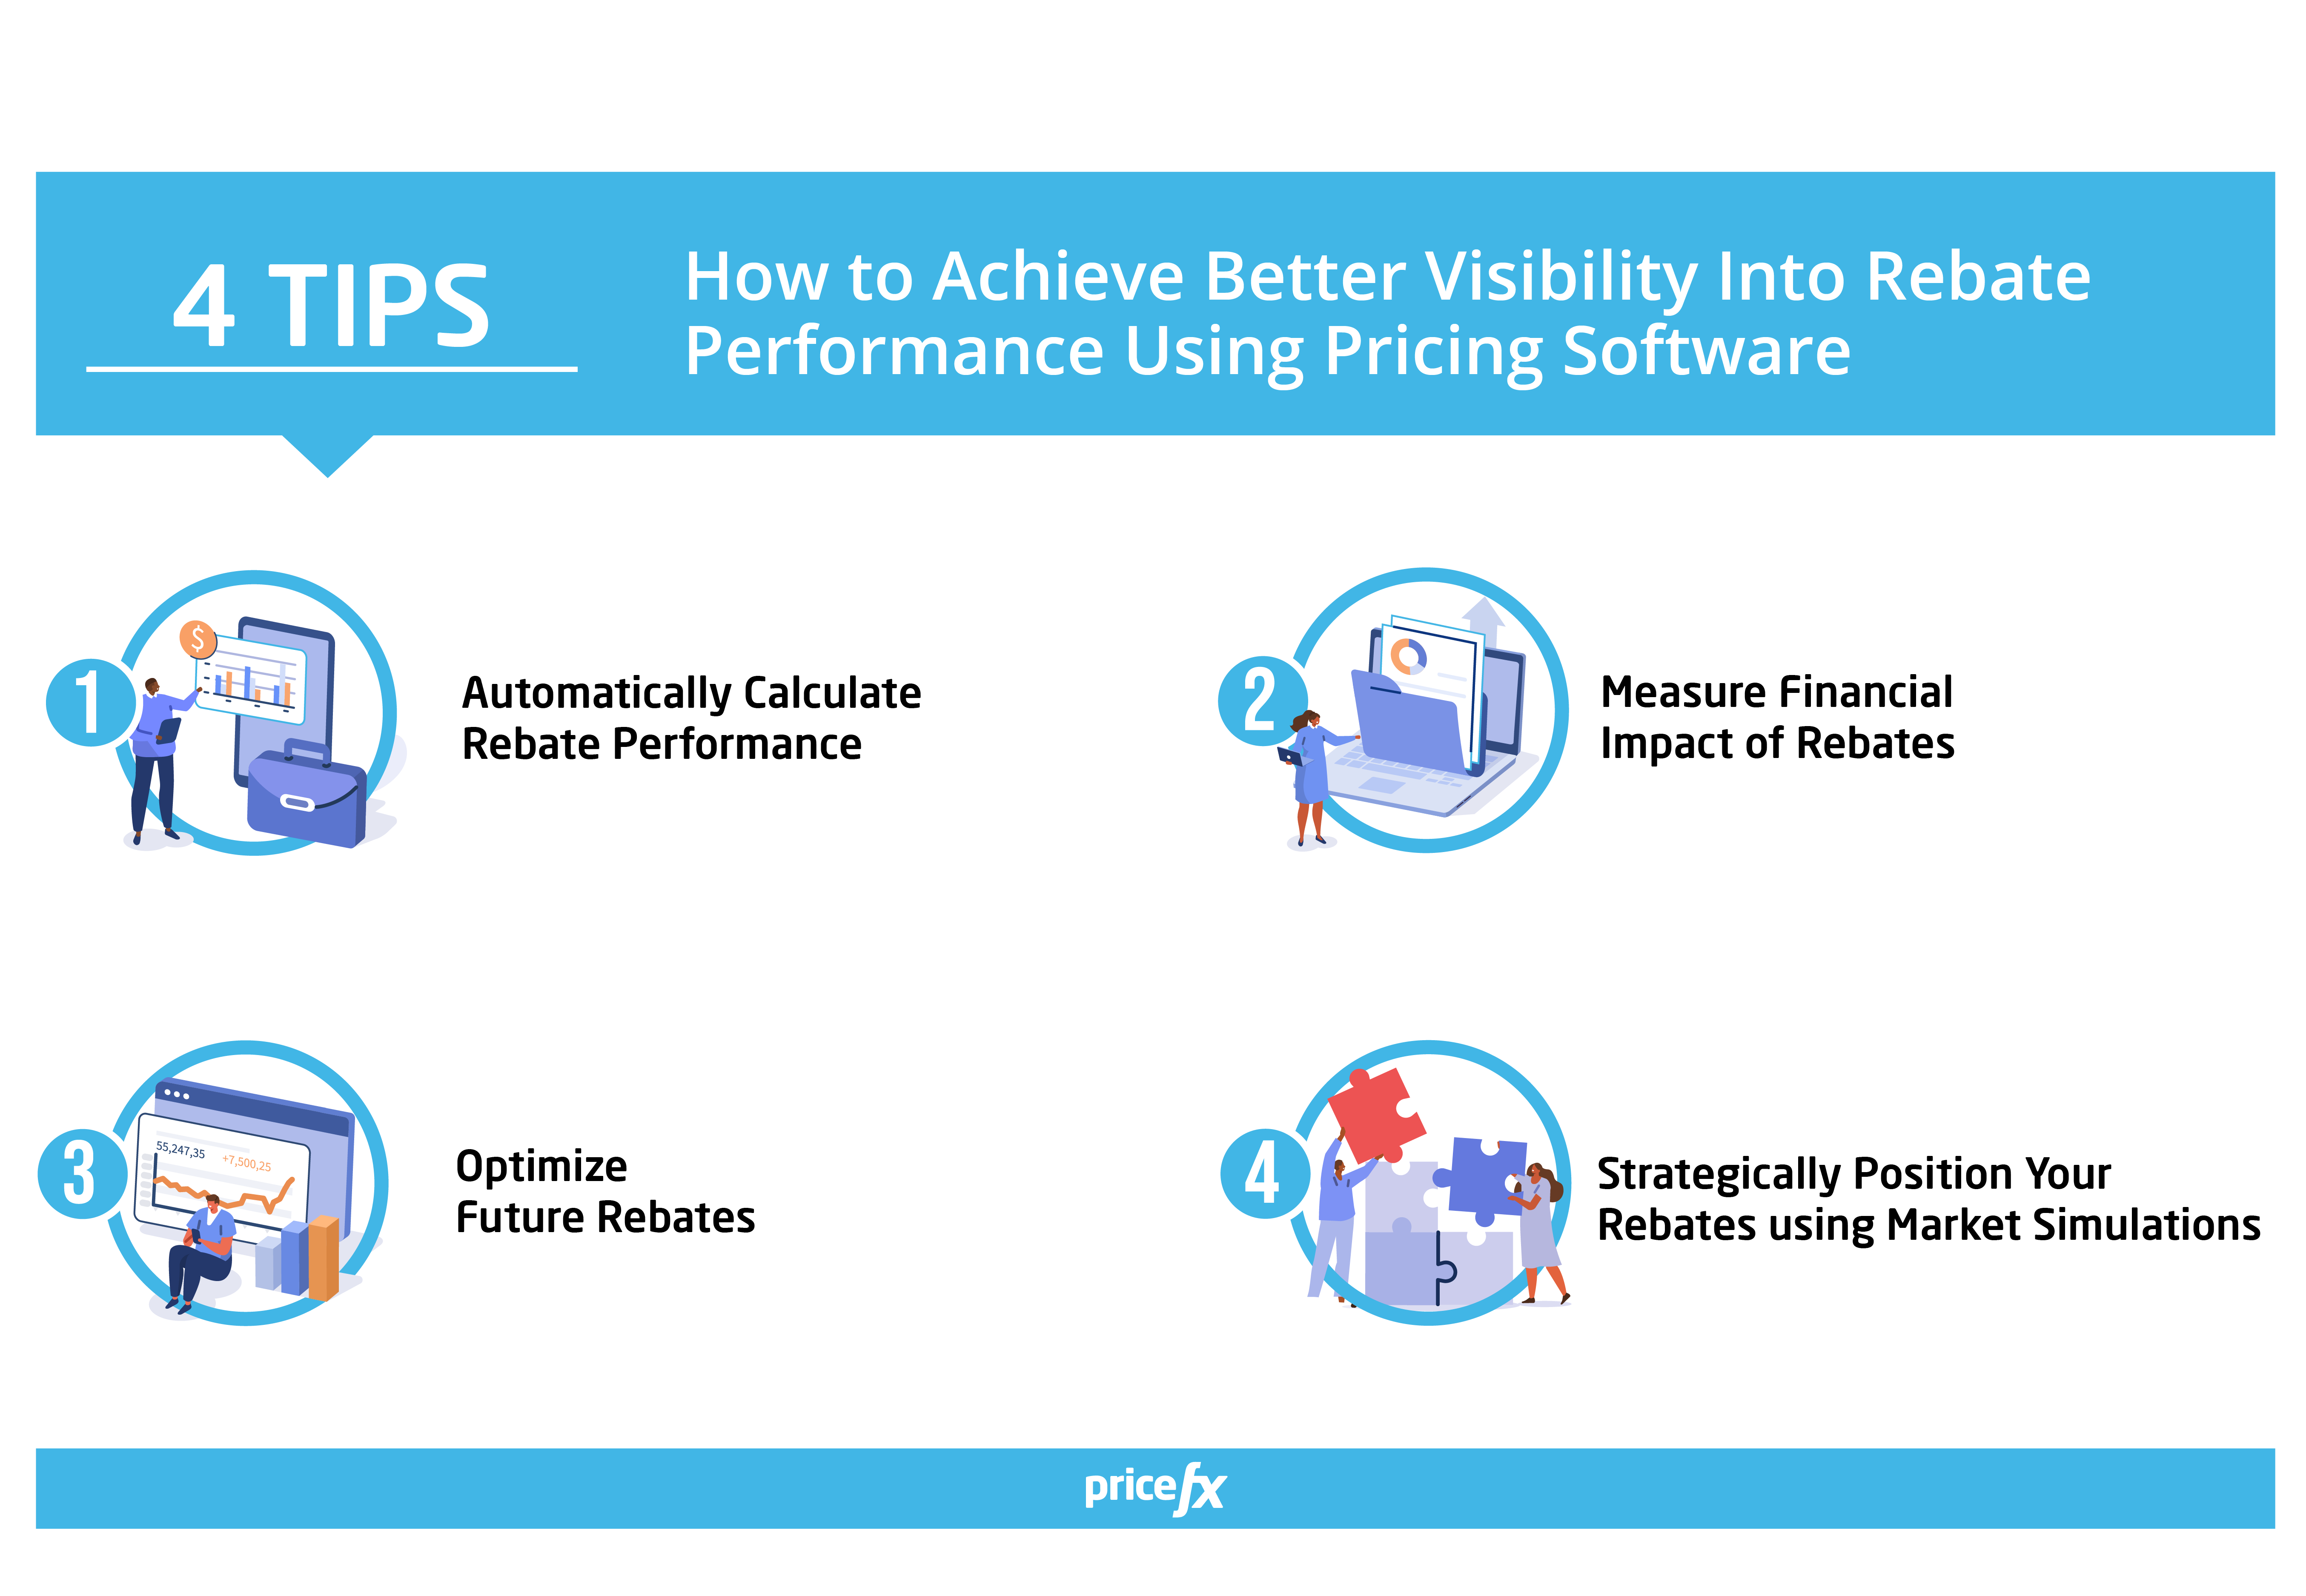 Image-How-to-Achieve-Better-Visibility-Into-Rebate-Performance-Using-Pricing-Software